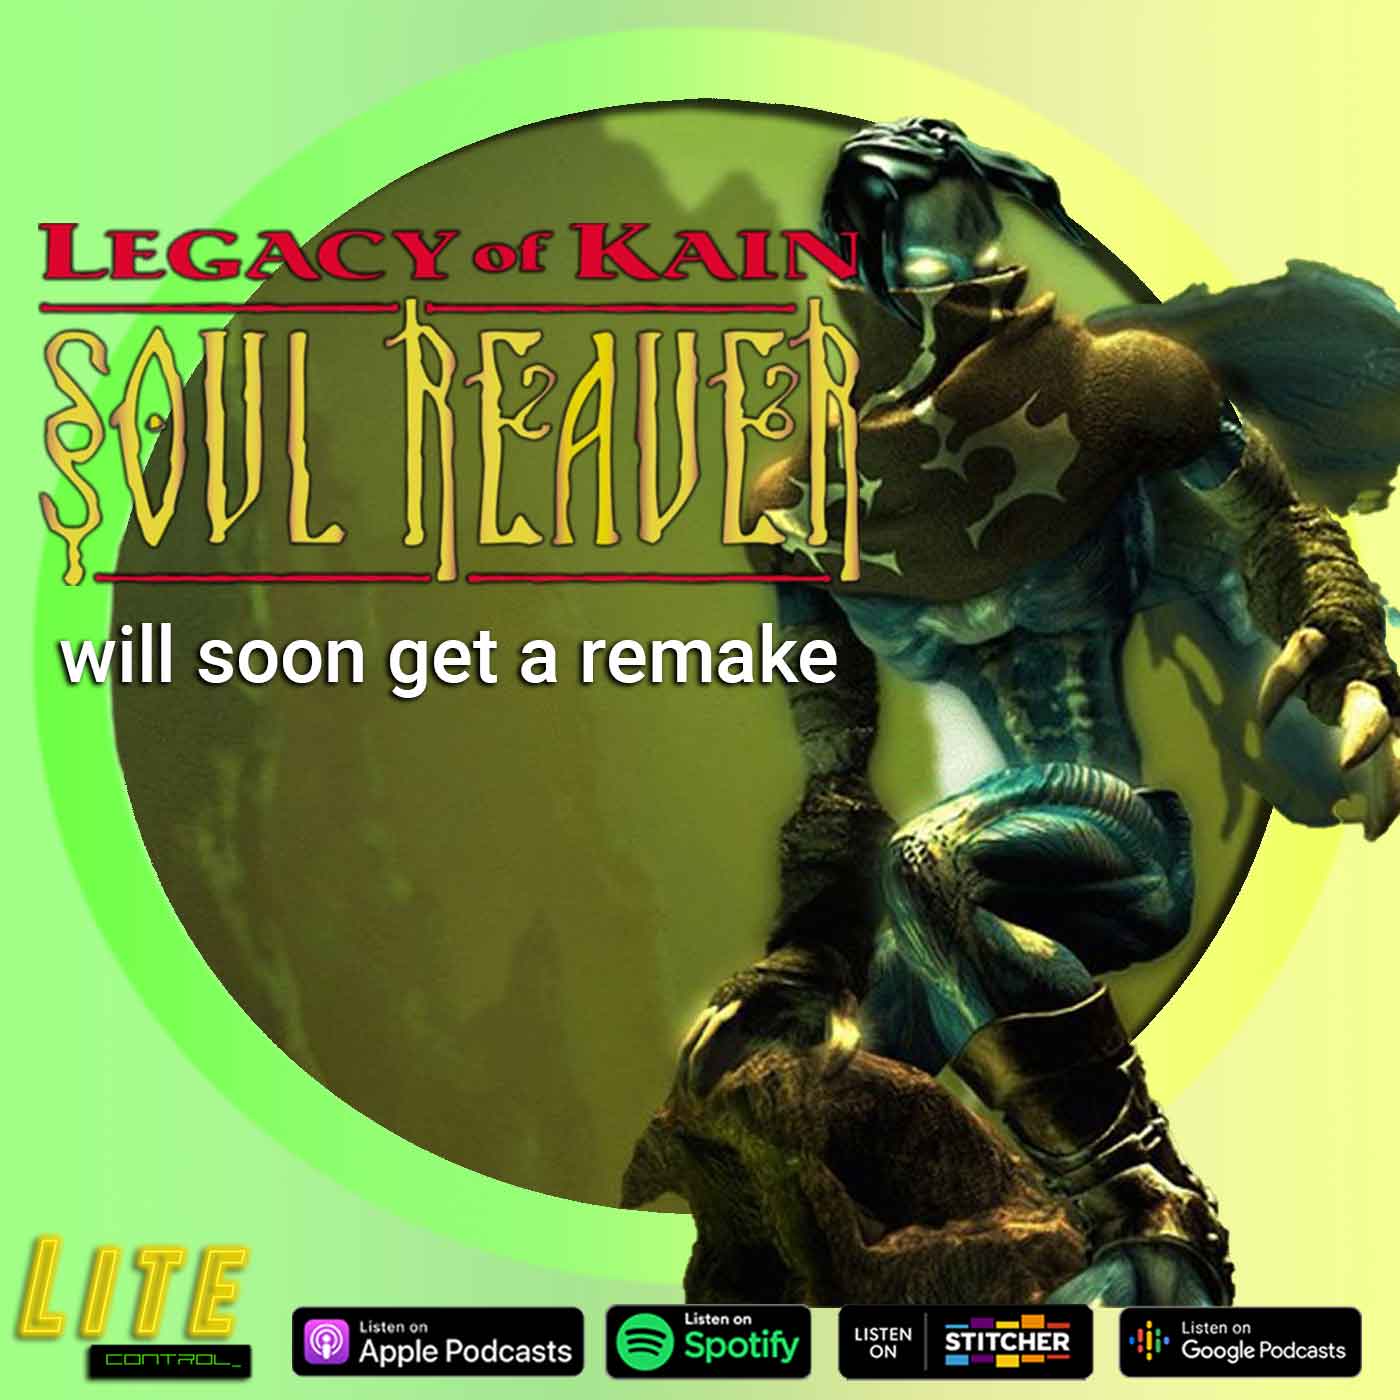 Lite Control 135 - Legacy of Kain Soul Reaver is Rumored to have a Remake